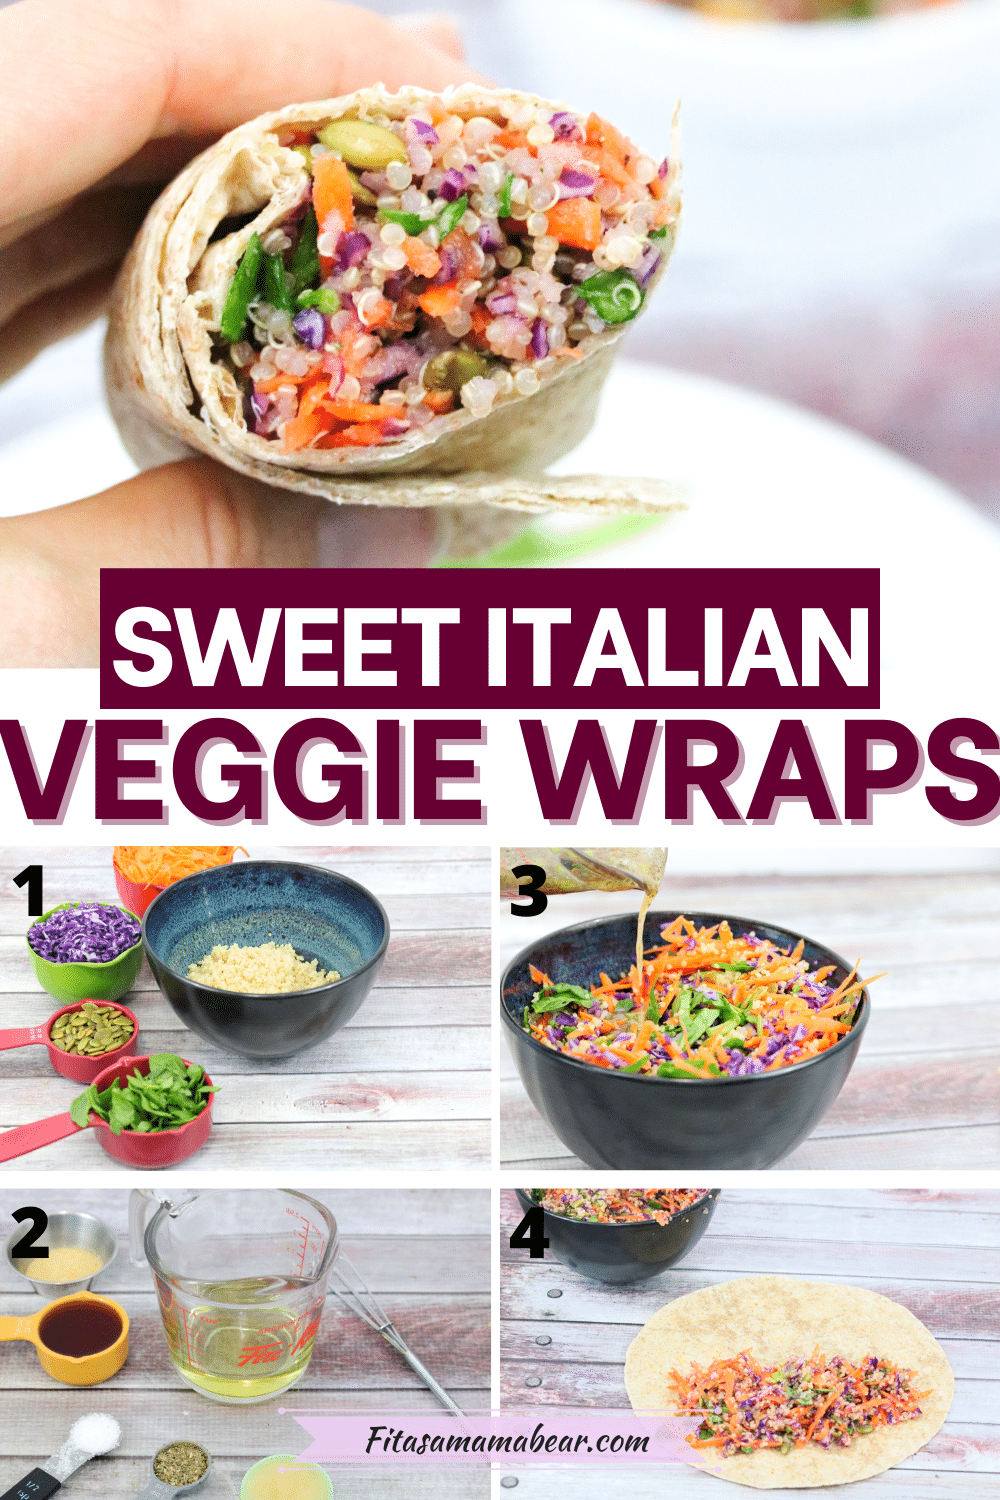 Image with text: multiple images of a veggie quinoa wrap. One image held up close the other images of how to make the gluten-free wrap